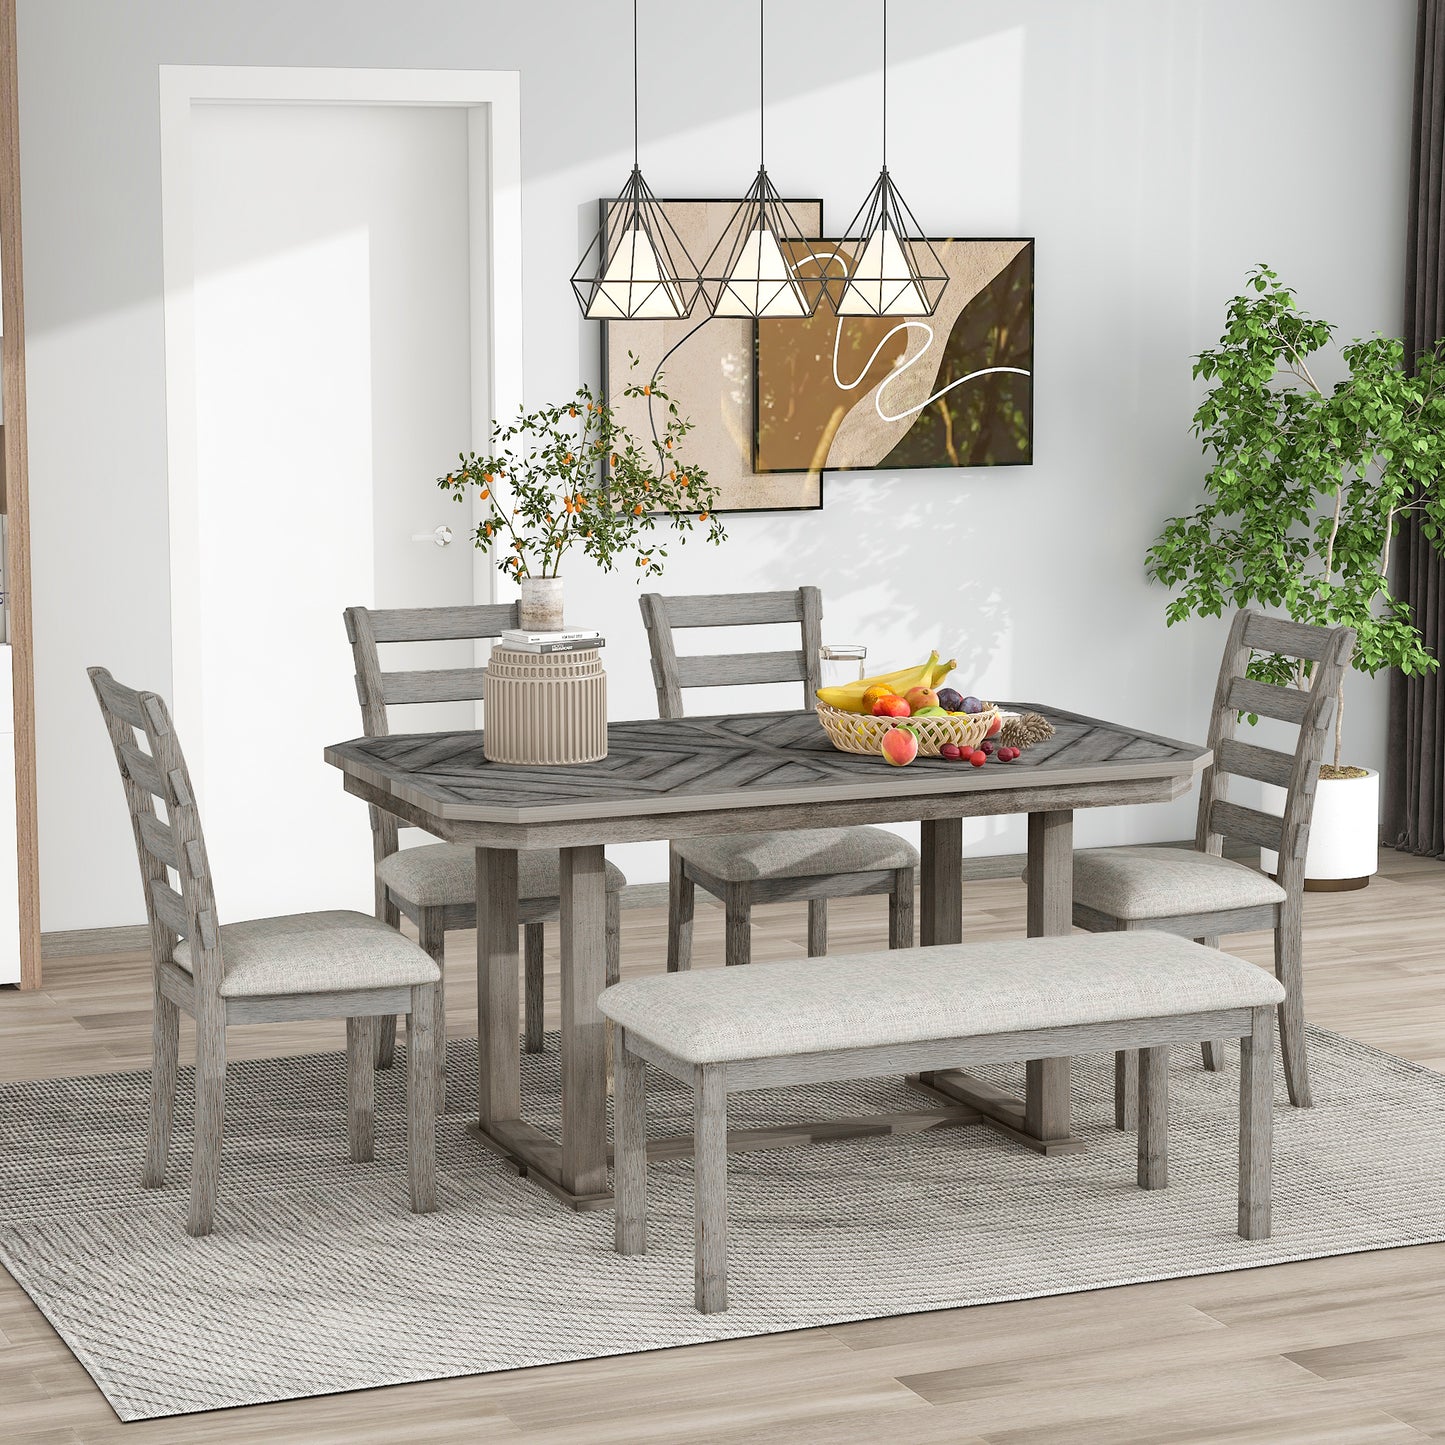 6-Piece Chevron Wood Grain Dining Table Set Upholstered Chairs and Bench (Gray)